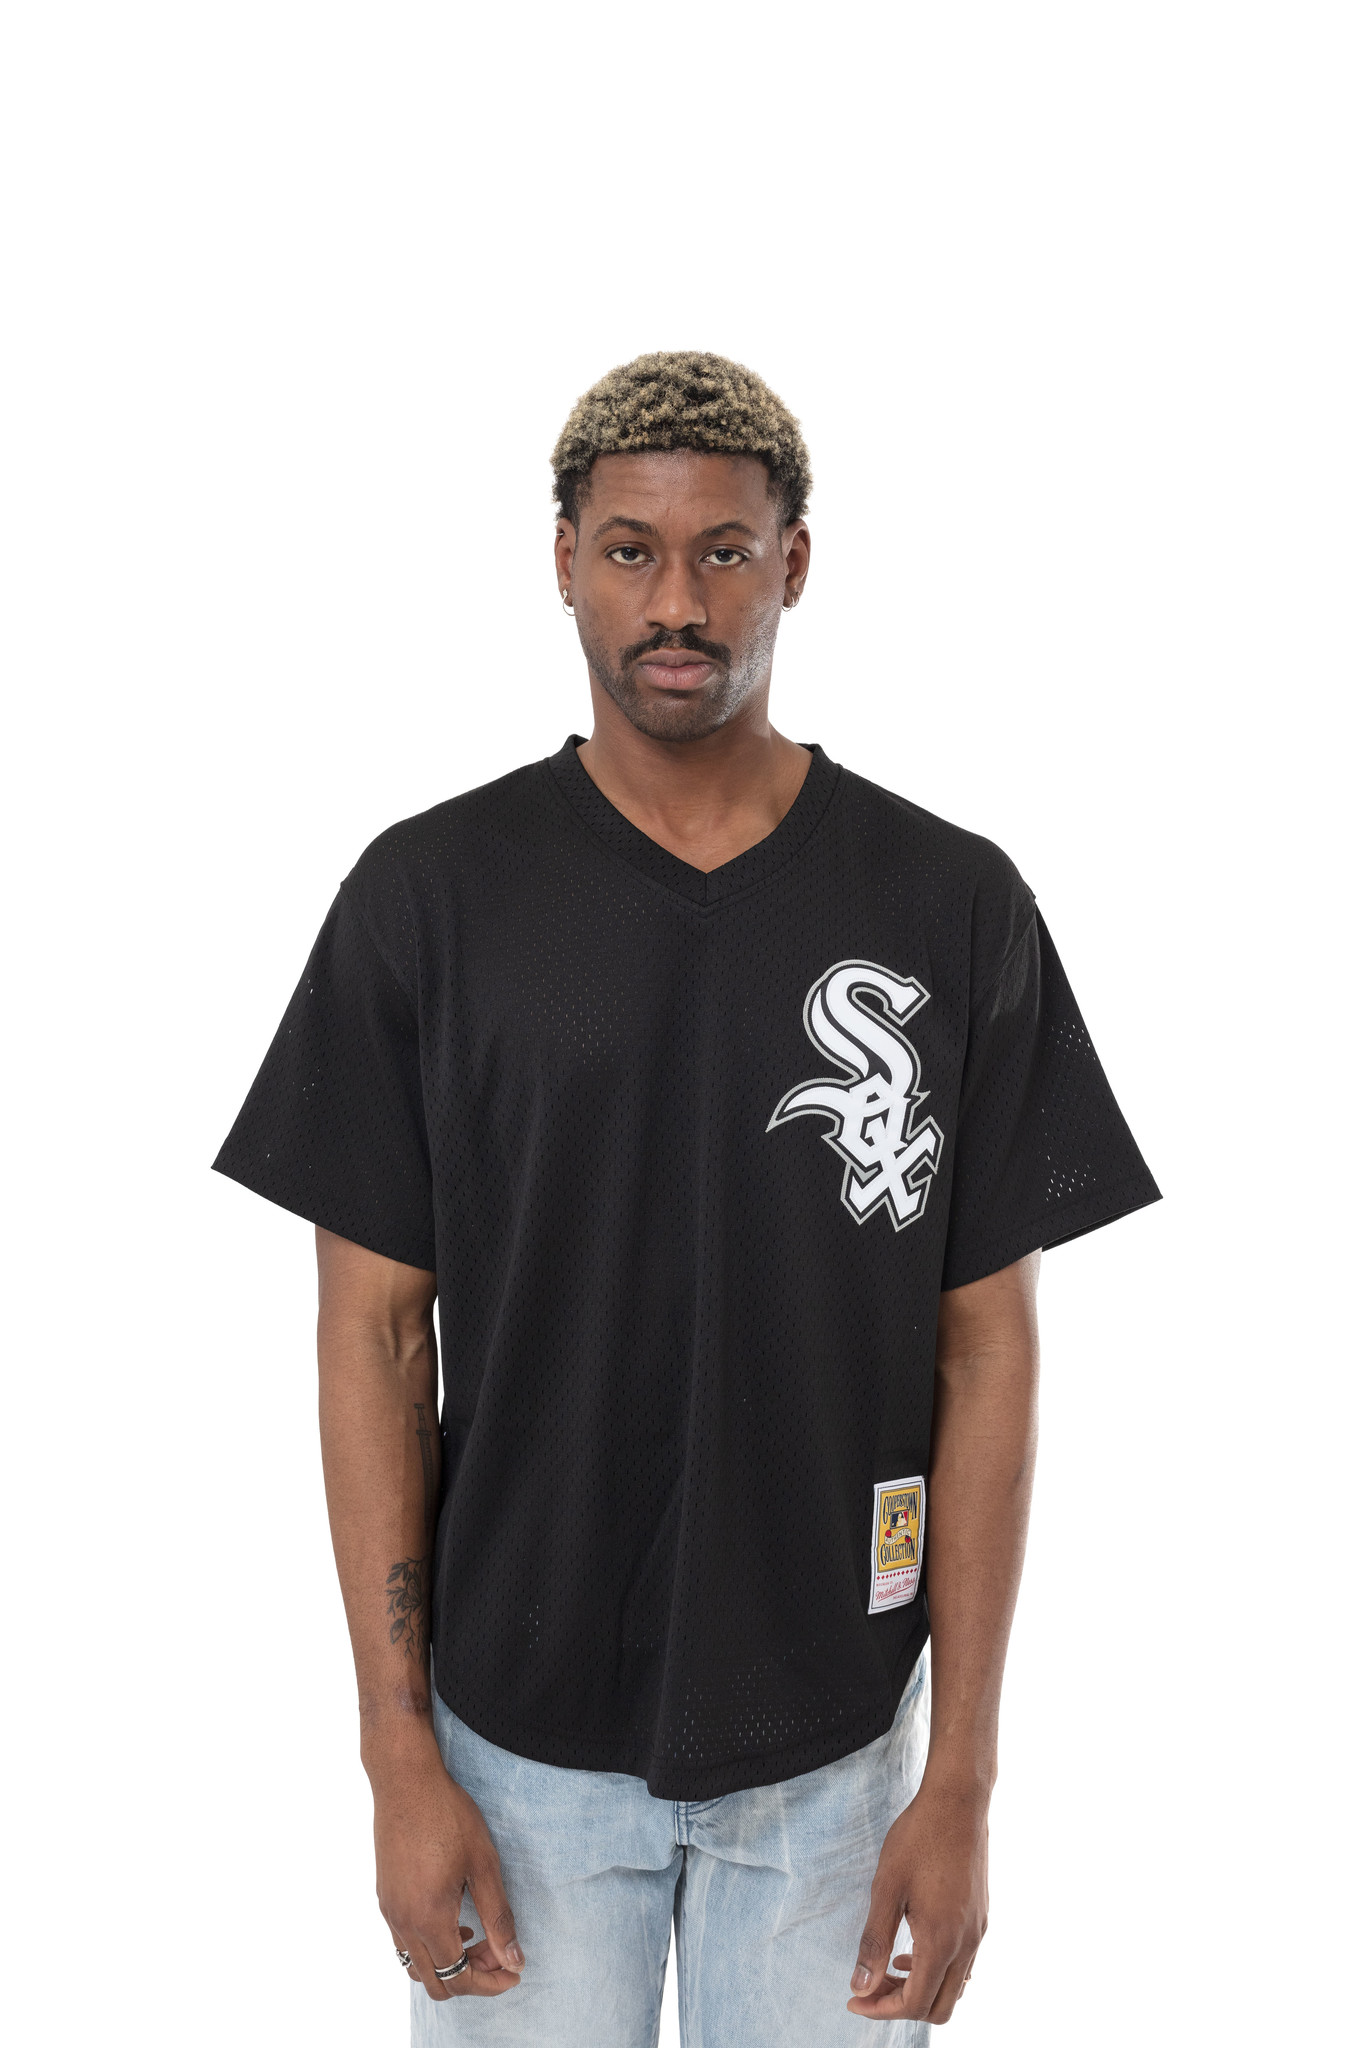 Authentic Vintage Mitchell & Ness Chicago White Sox Baseball Jersey